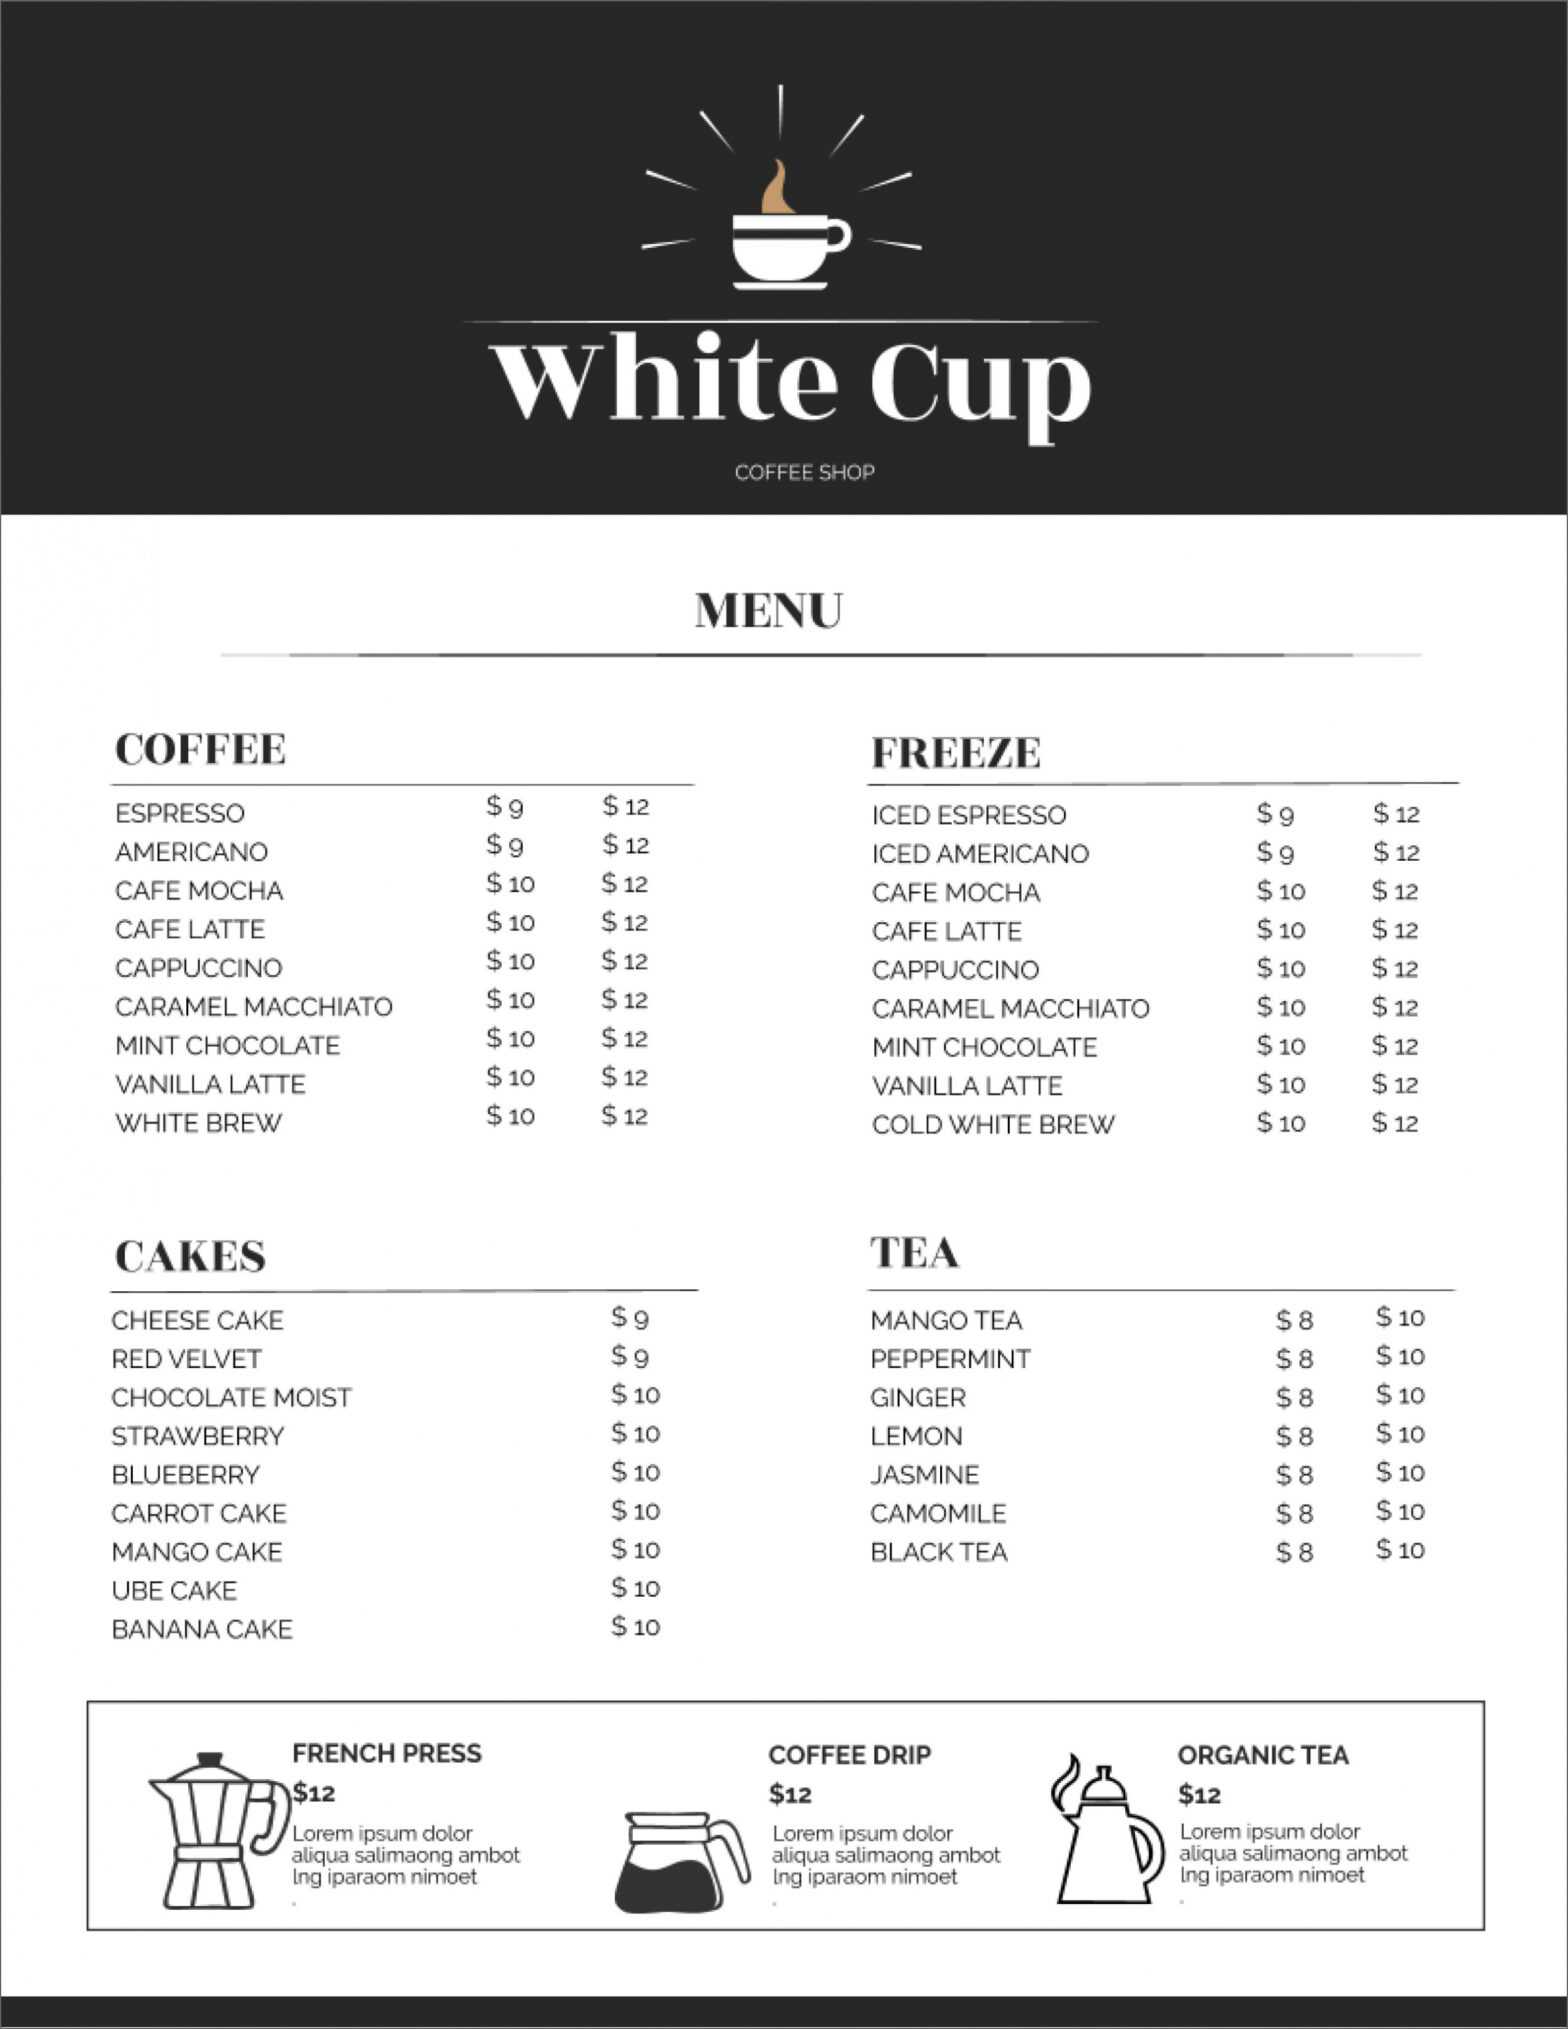 32 Free Simple Menu Templates For Restaurants, Cafes, And with regard to Menu Template Google Docs